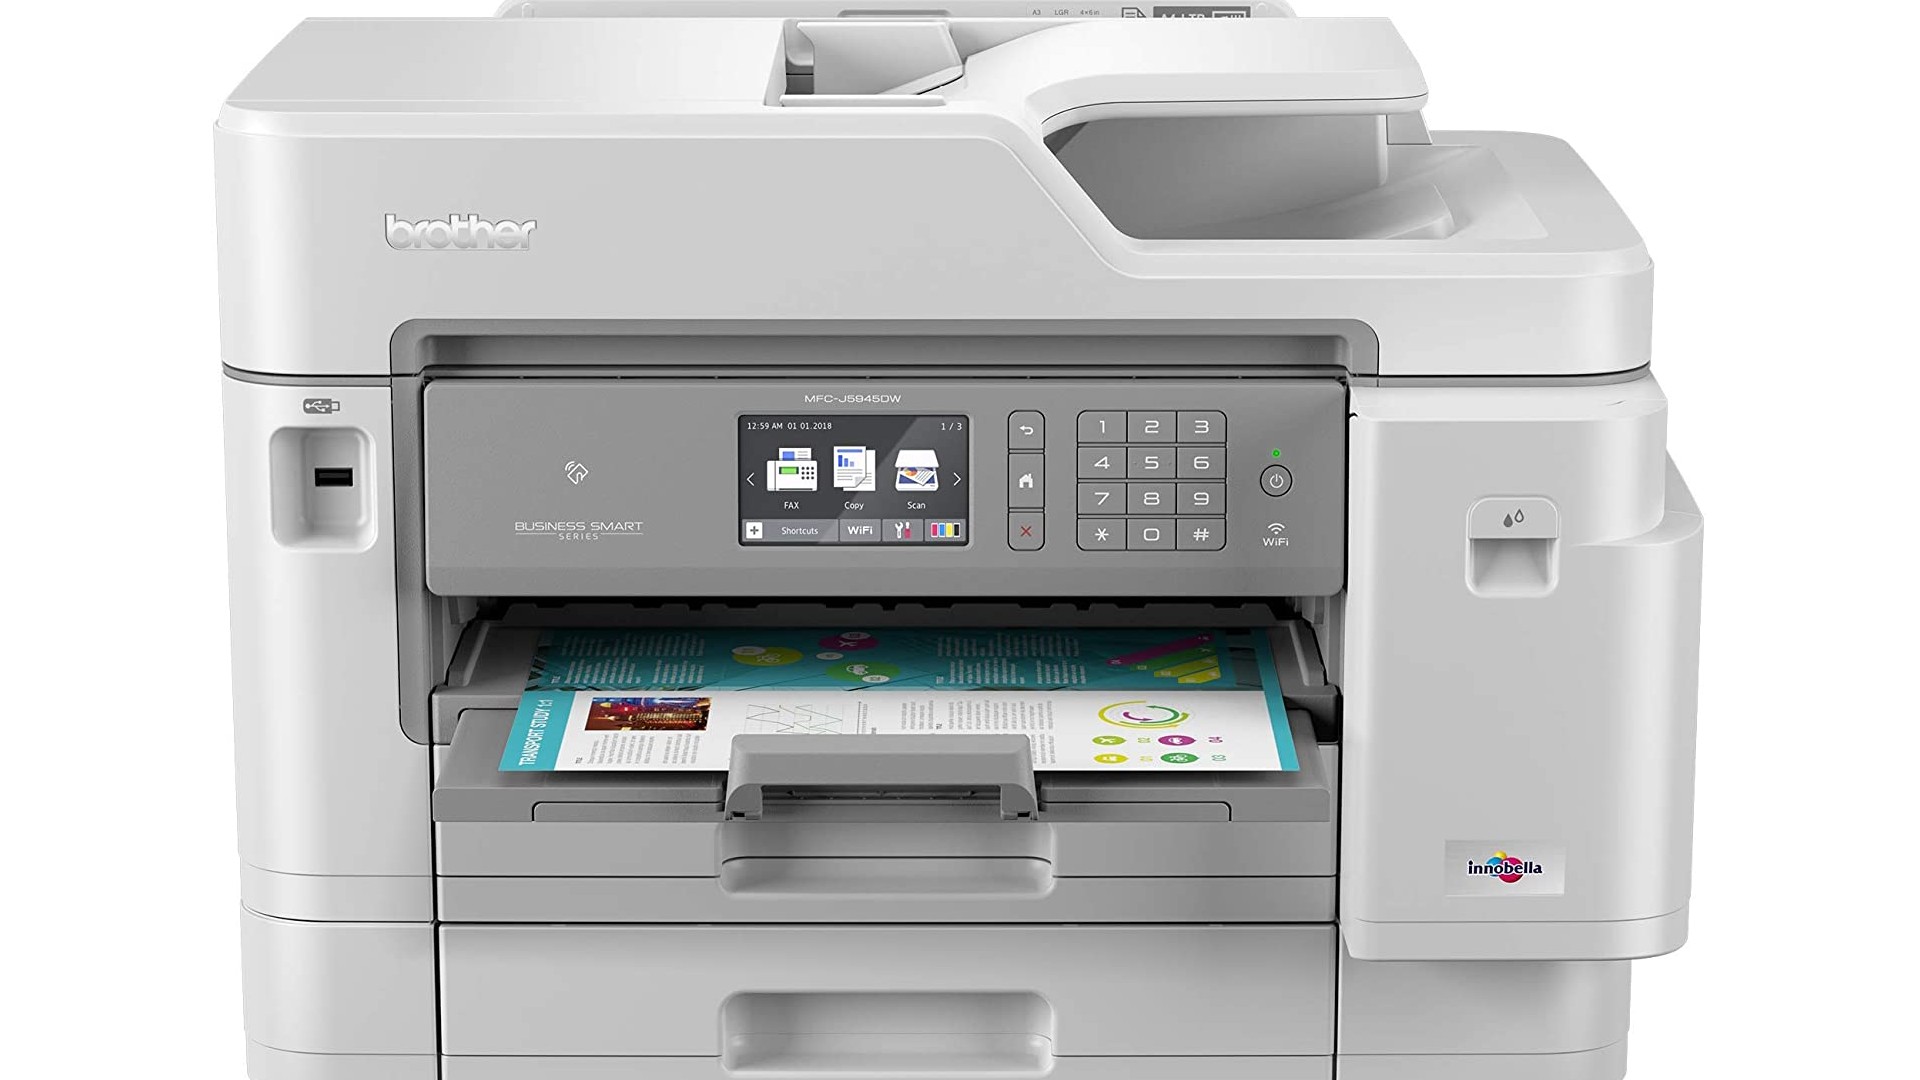 Product shot of the Brother MFC-J5945DW, one of the best all-in-one printers